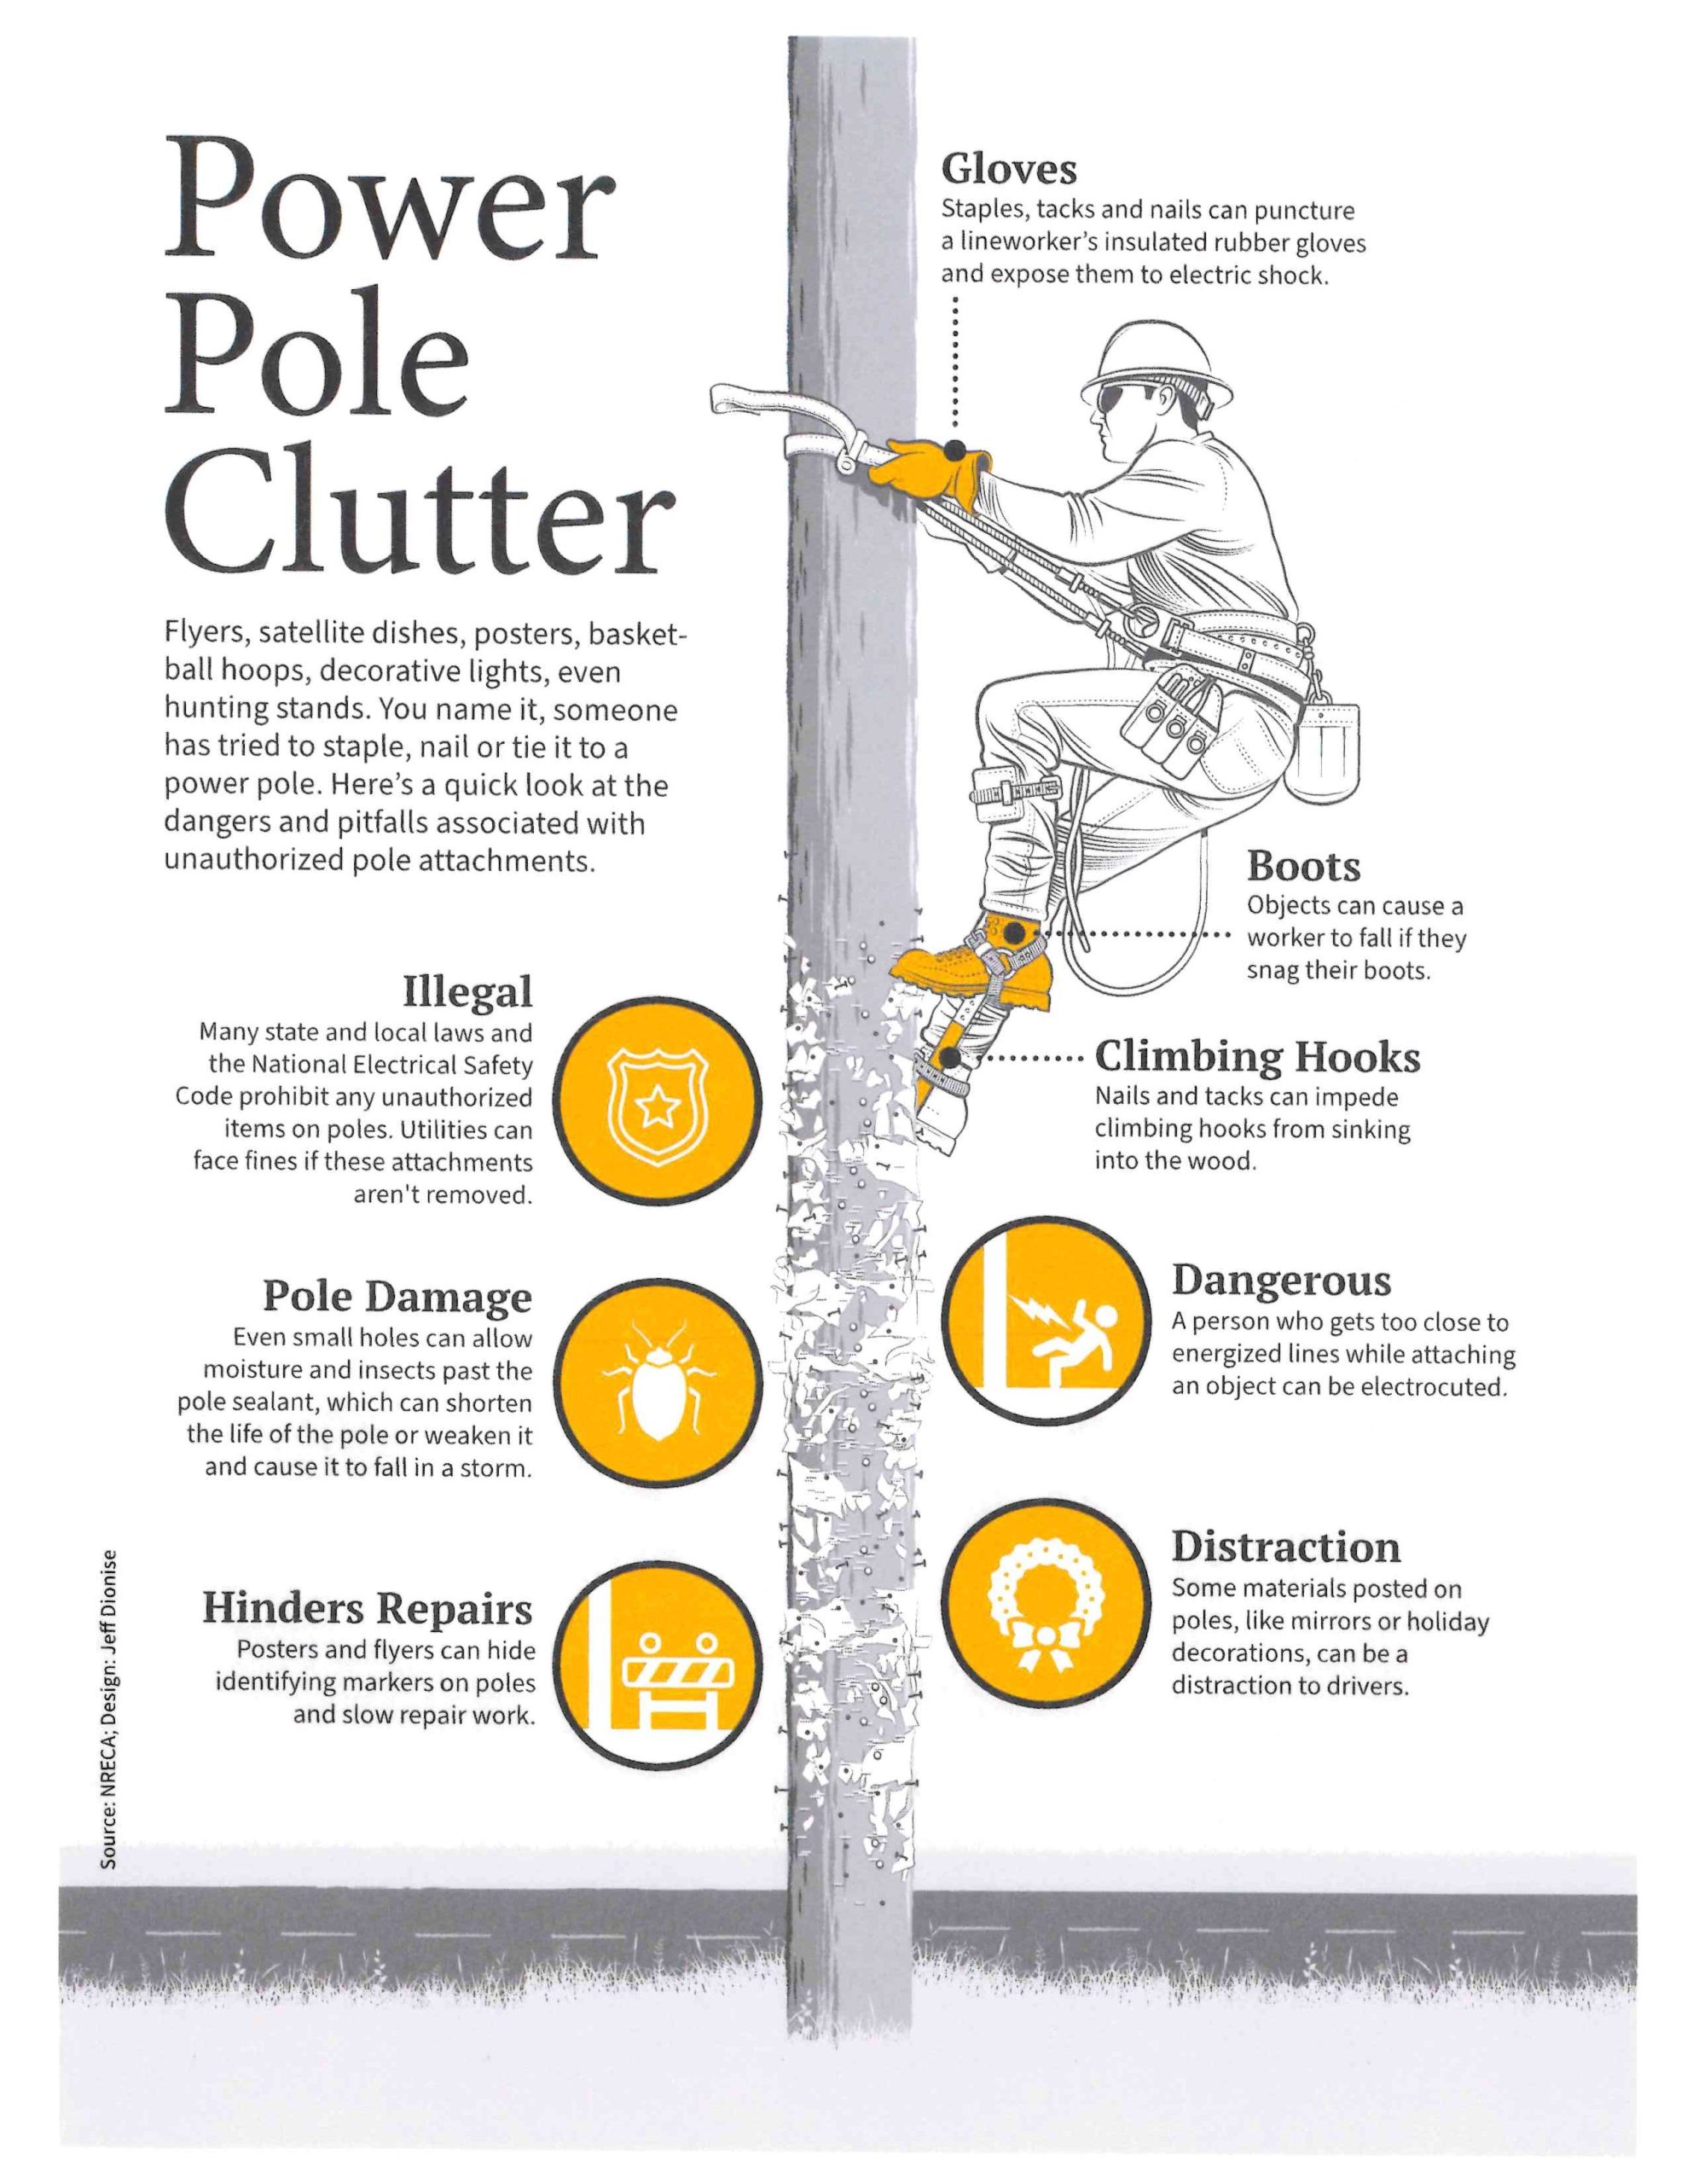 Power pole clutter graphic